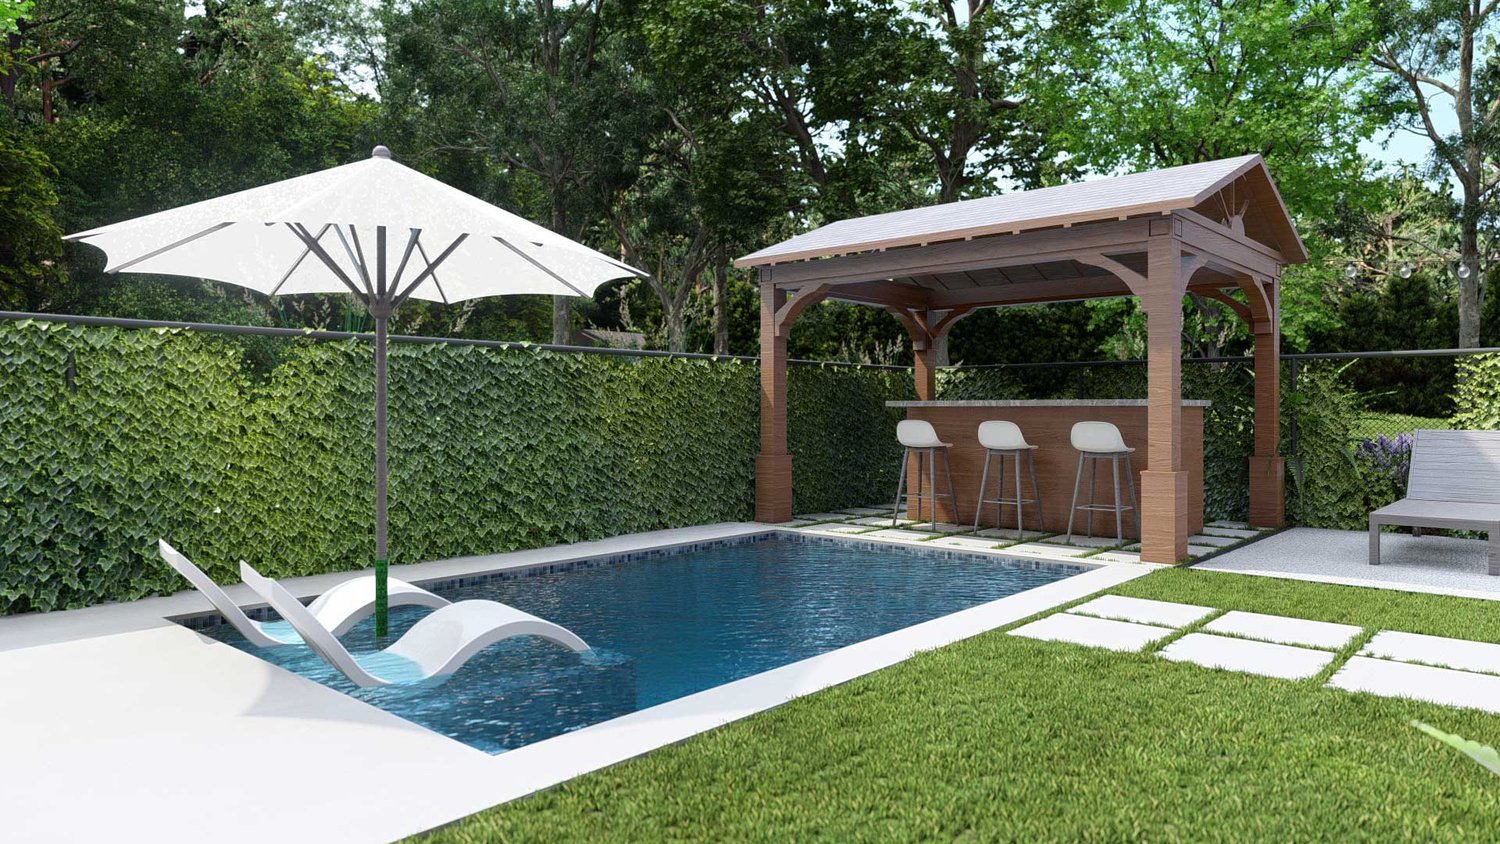 New Canaan yard with pool and pool lounge chairs with shade